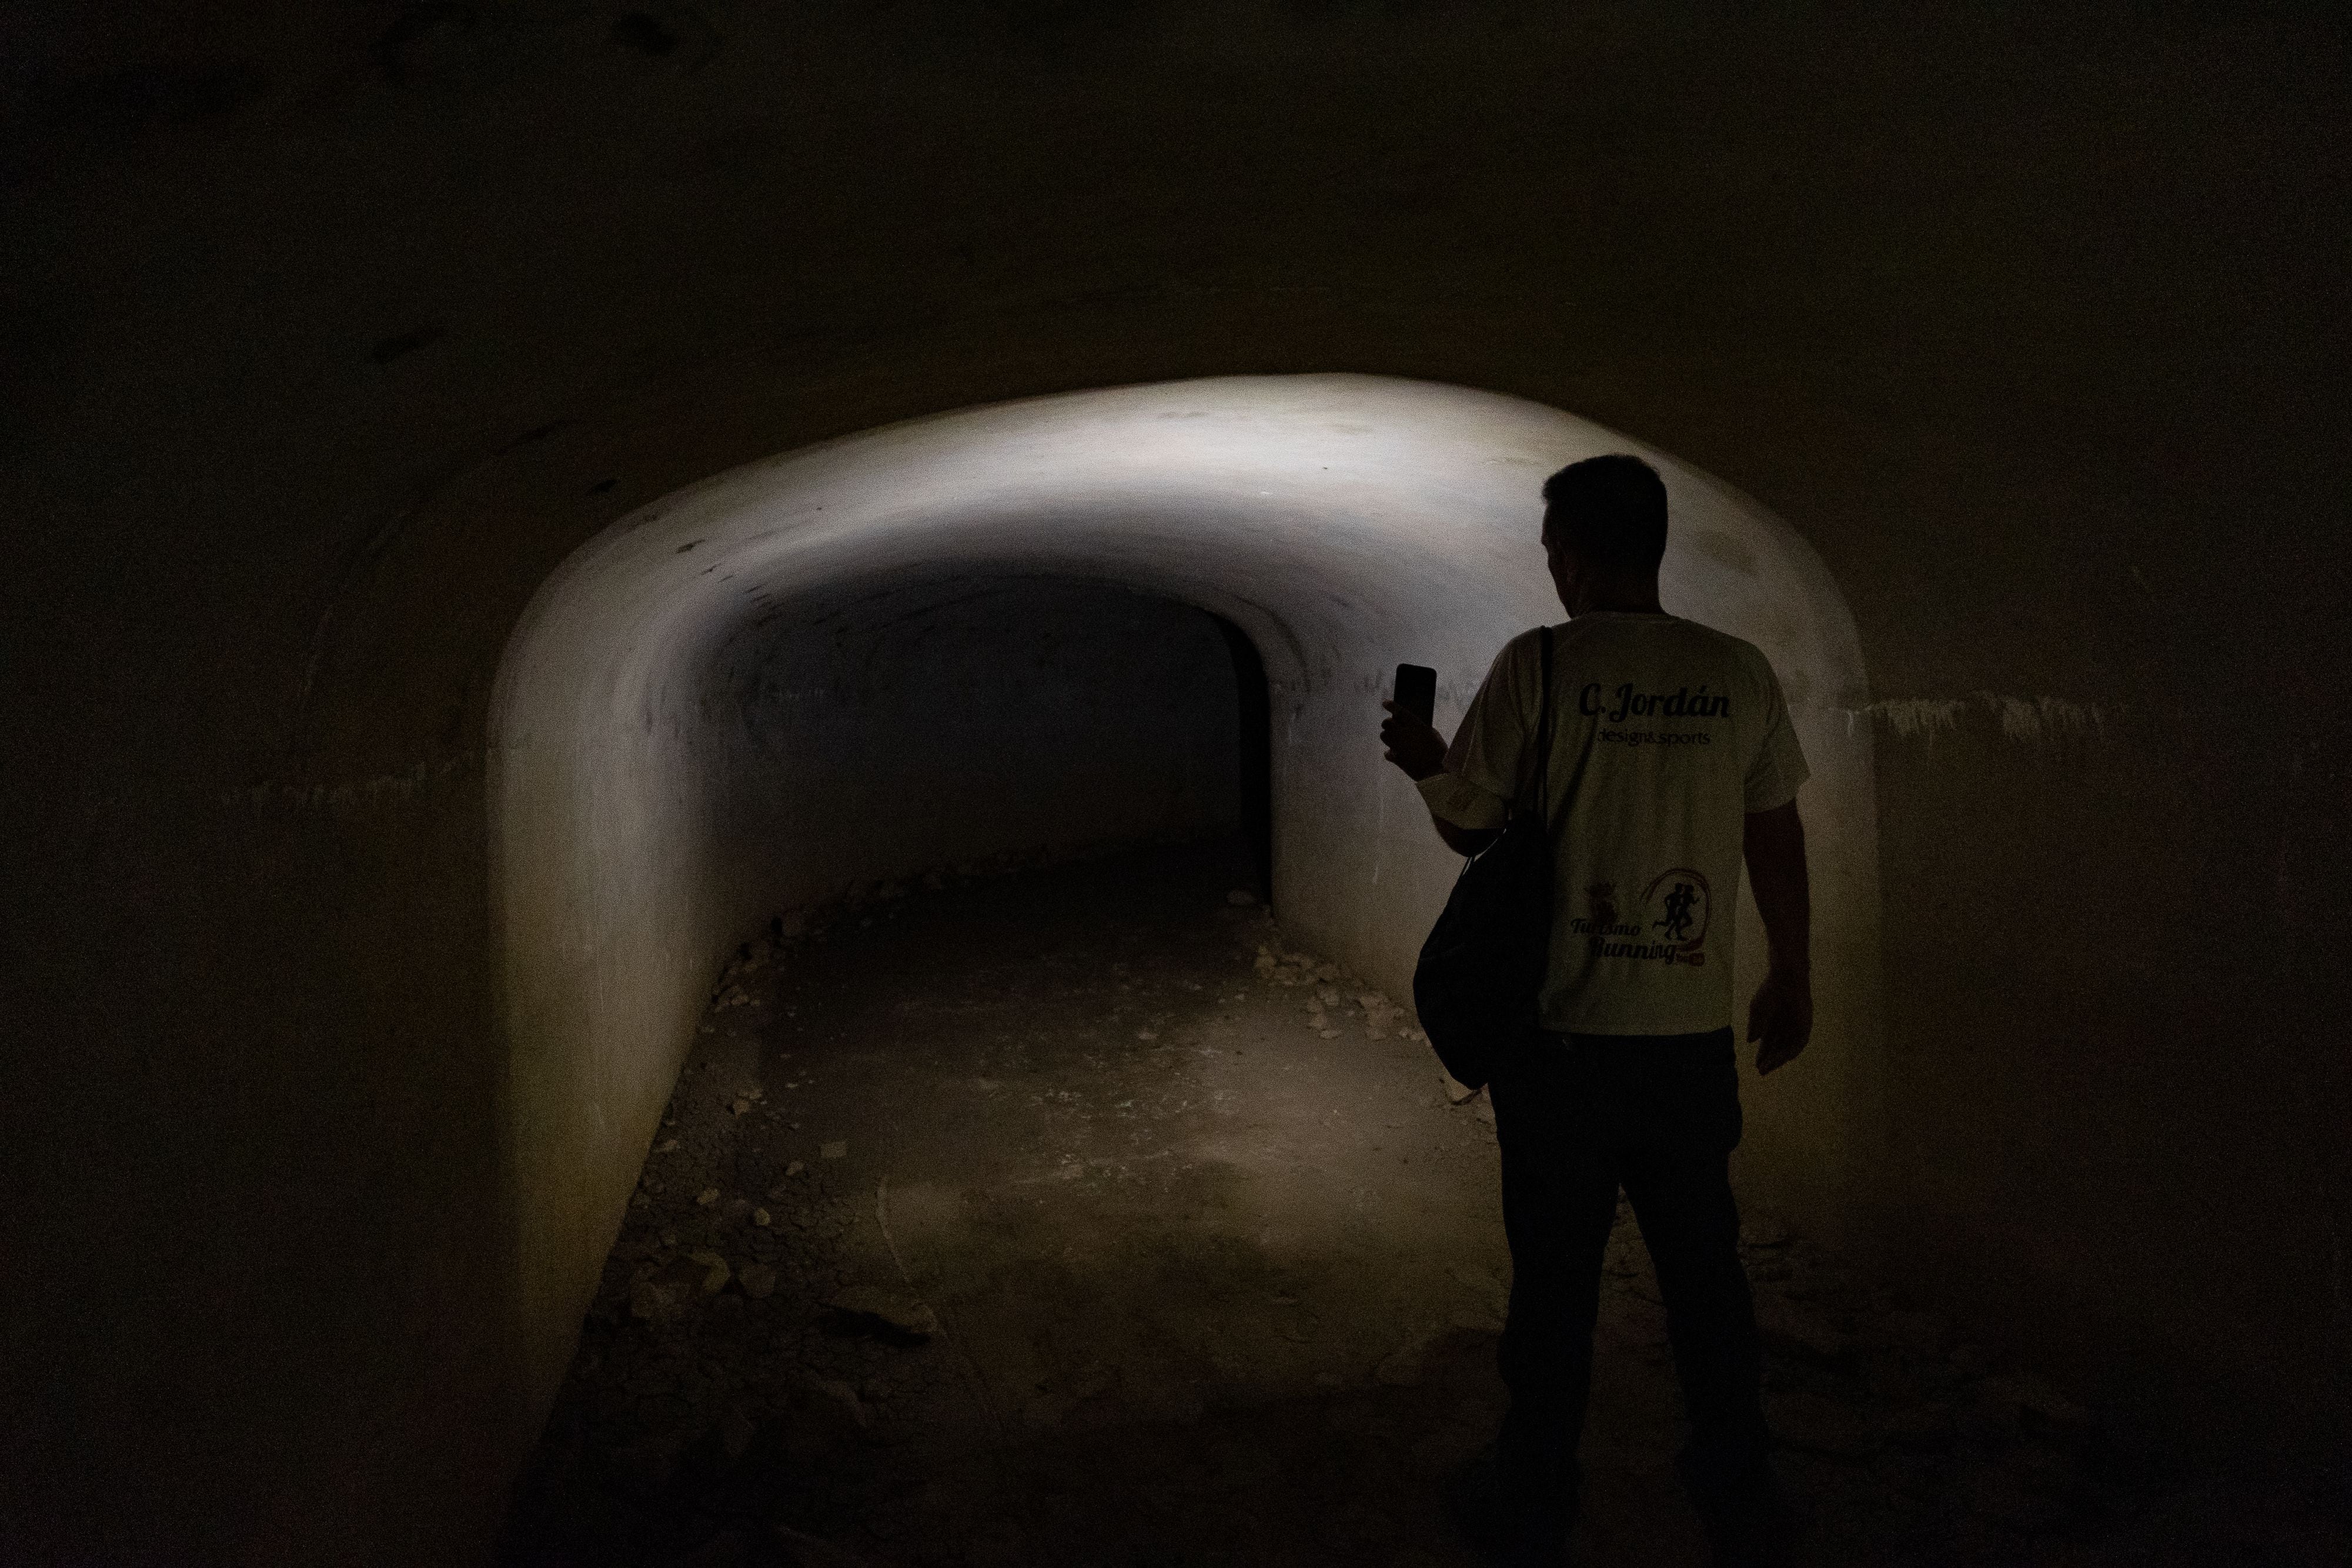 Carlos Jordán, from the San Roque tourism department, shines his flashlight on the tunnel that stretches around 500 meters under the Sierra Carbonera in La Línea de la Concepción.